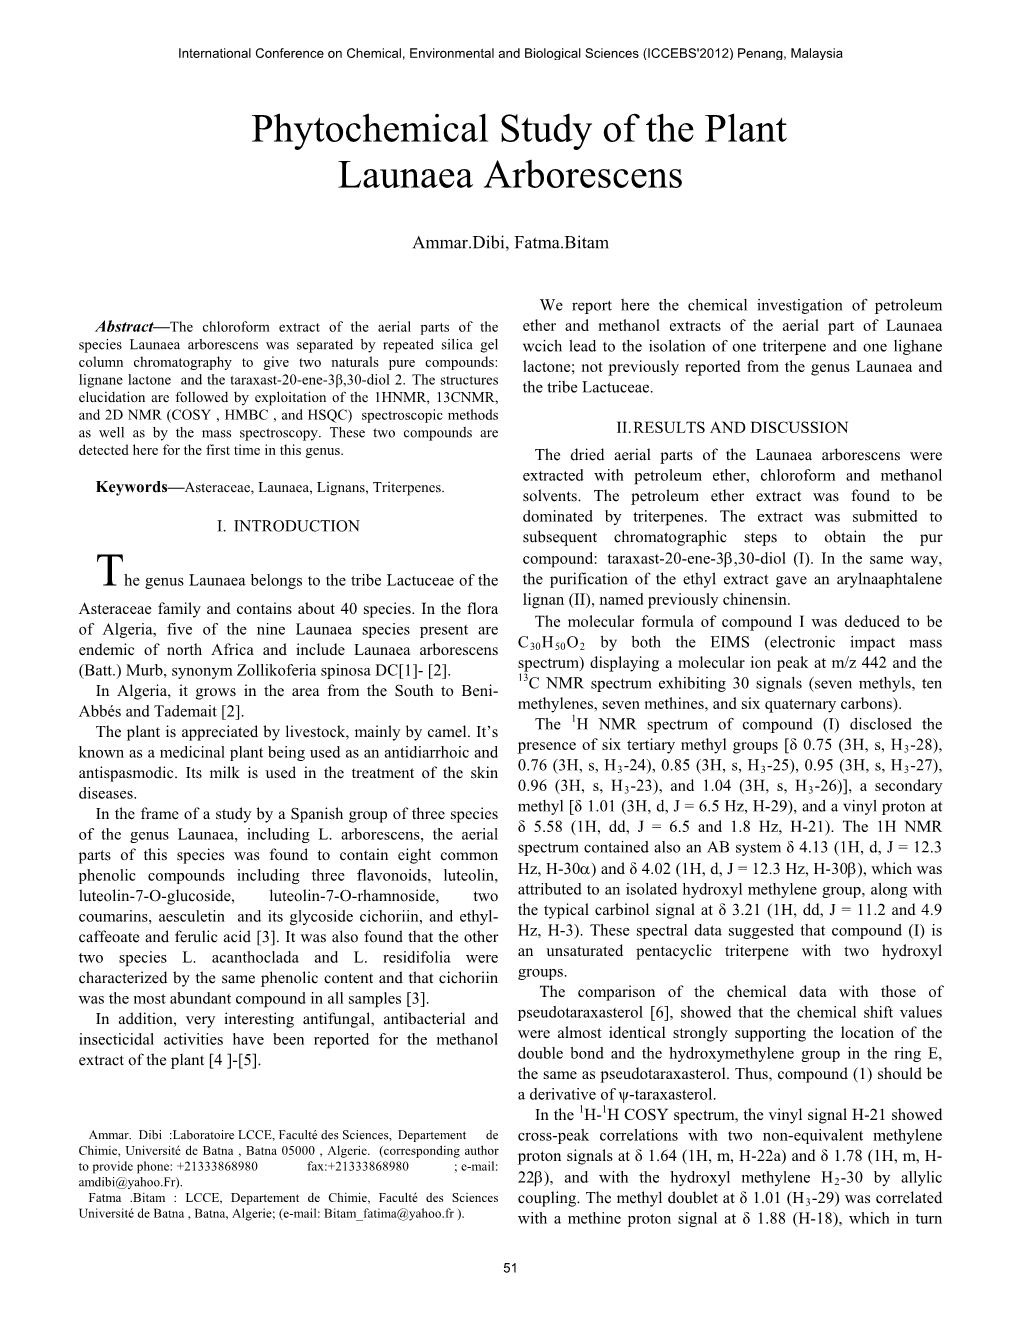 Phytochemical Study of the Plant Launaea Arborescens